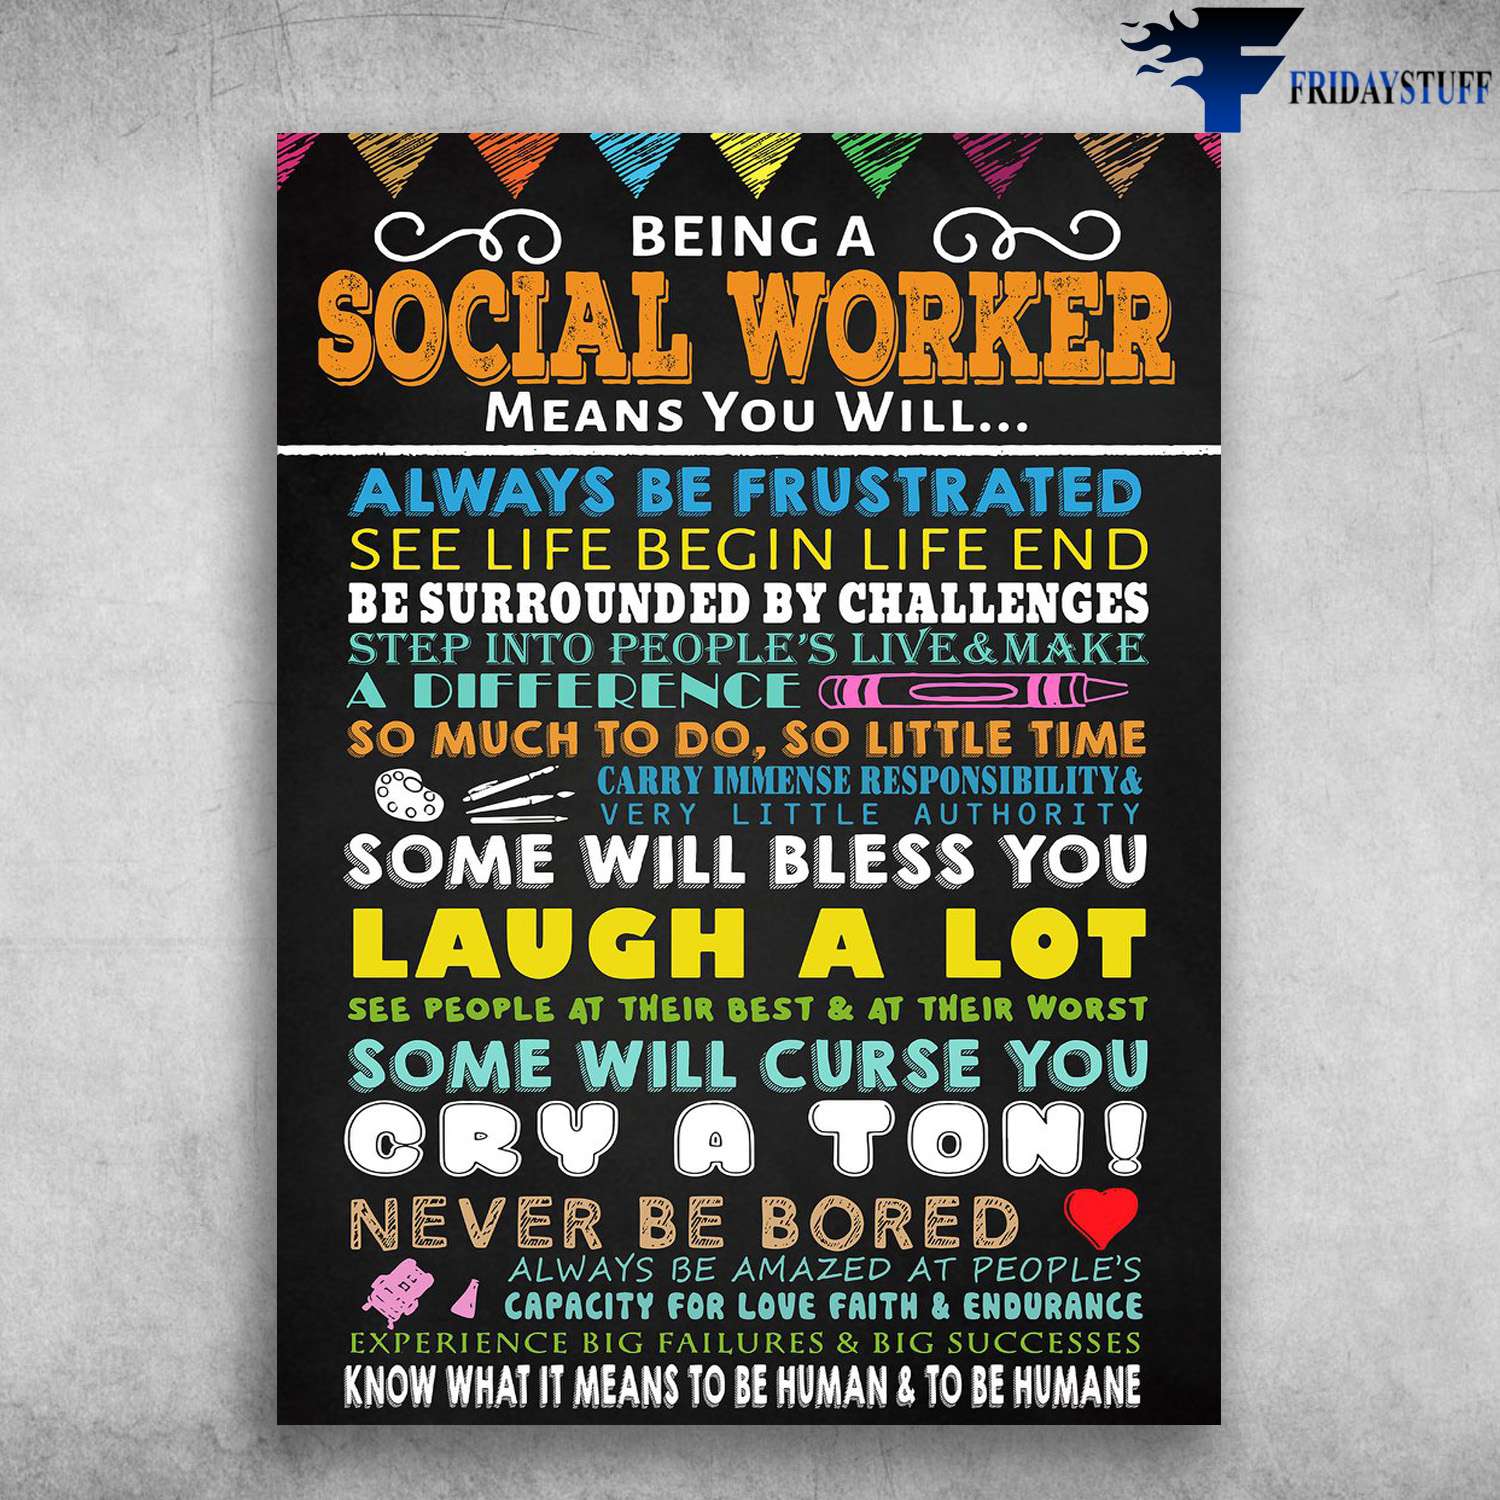 Social Worker, Be A Social Worker, Mean You Will Always Be Frustrated, See Life Begin Life, And Be Surround By Challenges, Step Into People's Live, And Make A Difference So Much To Do